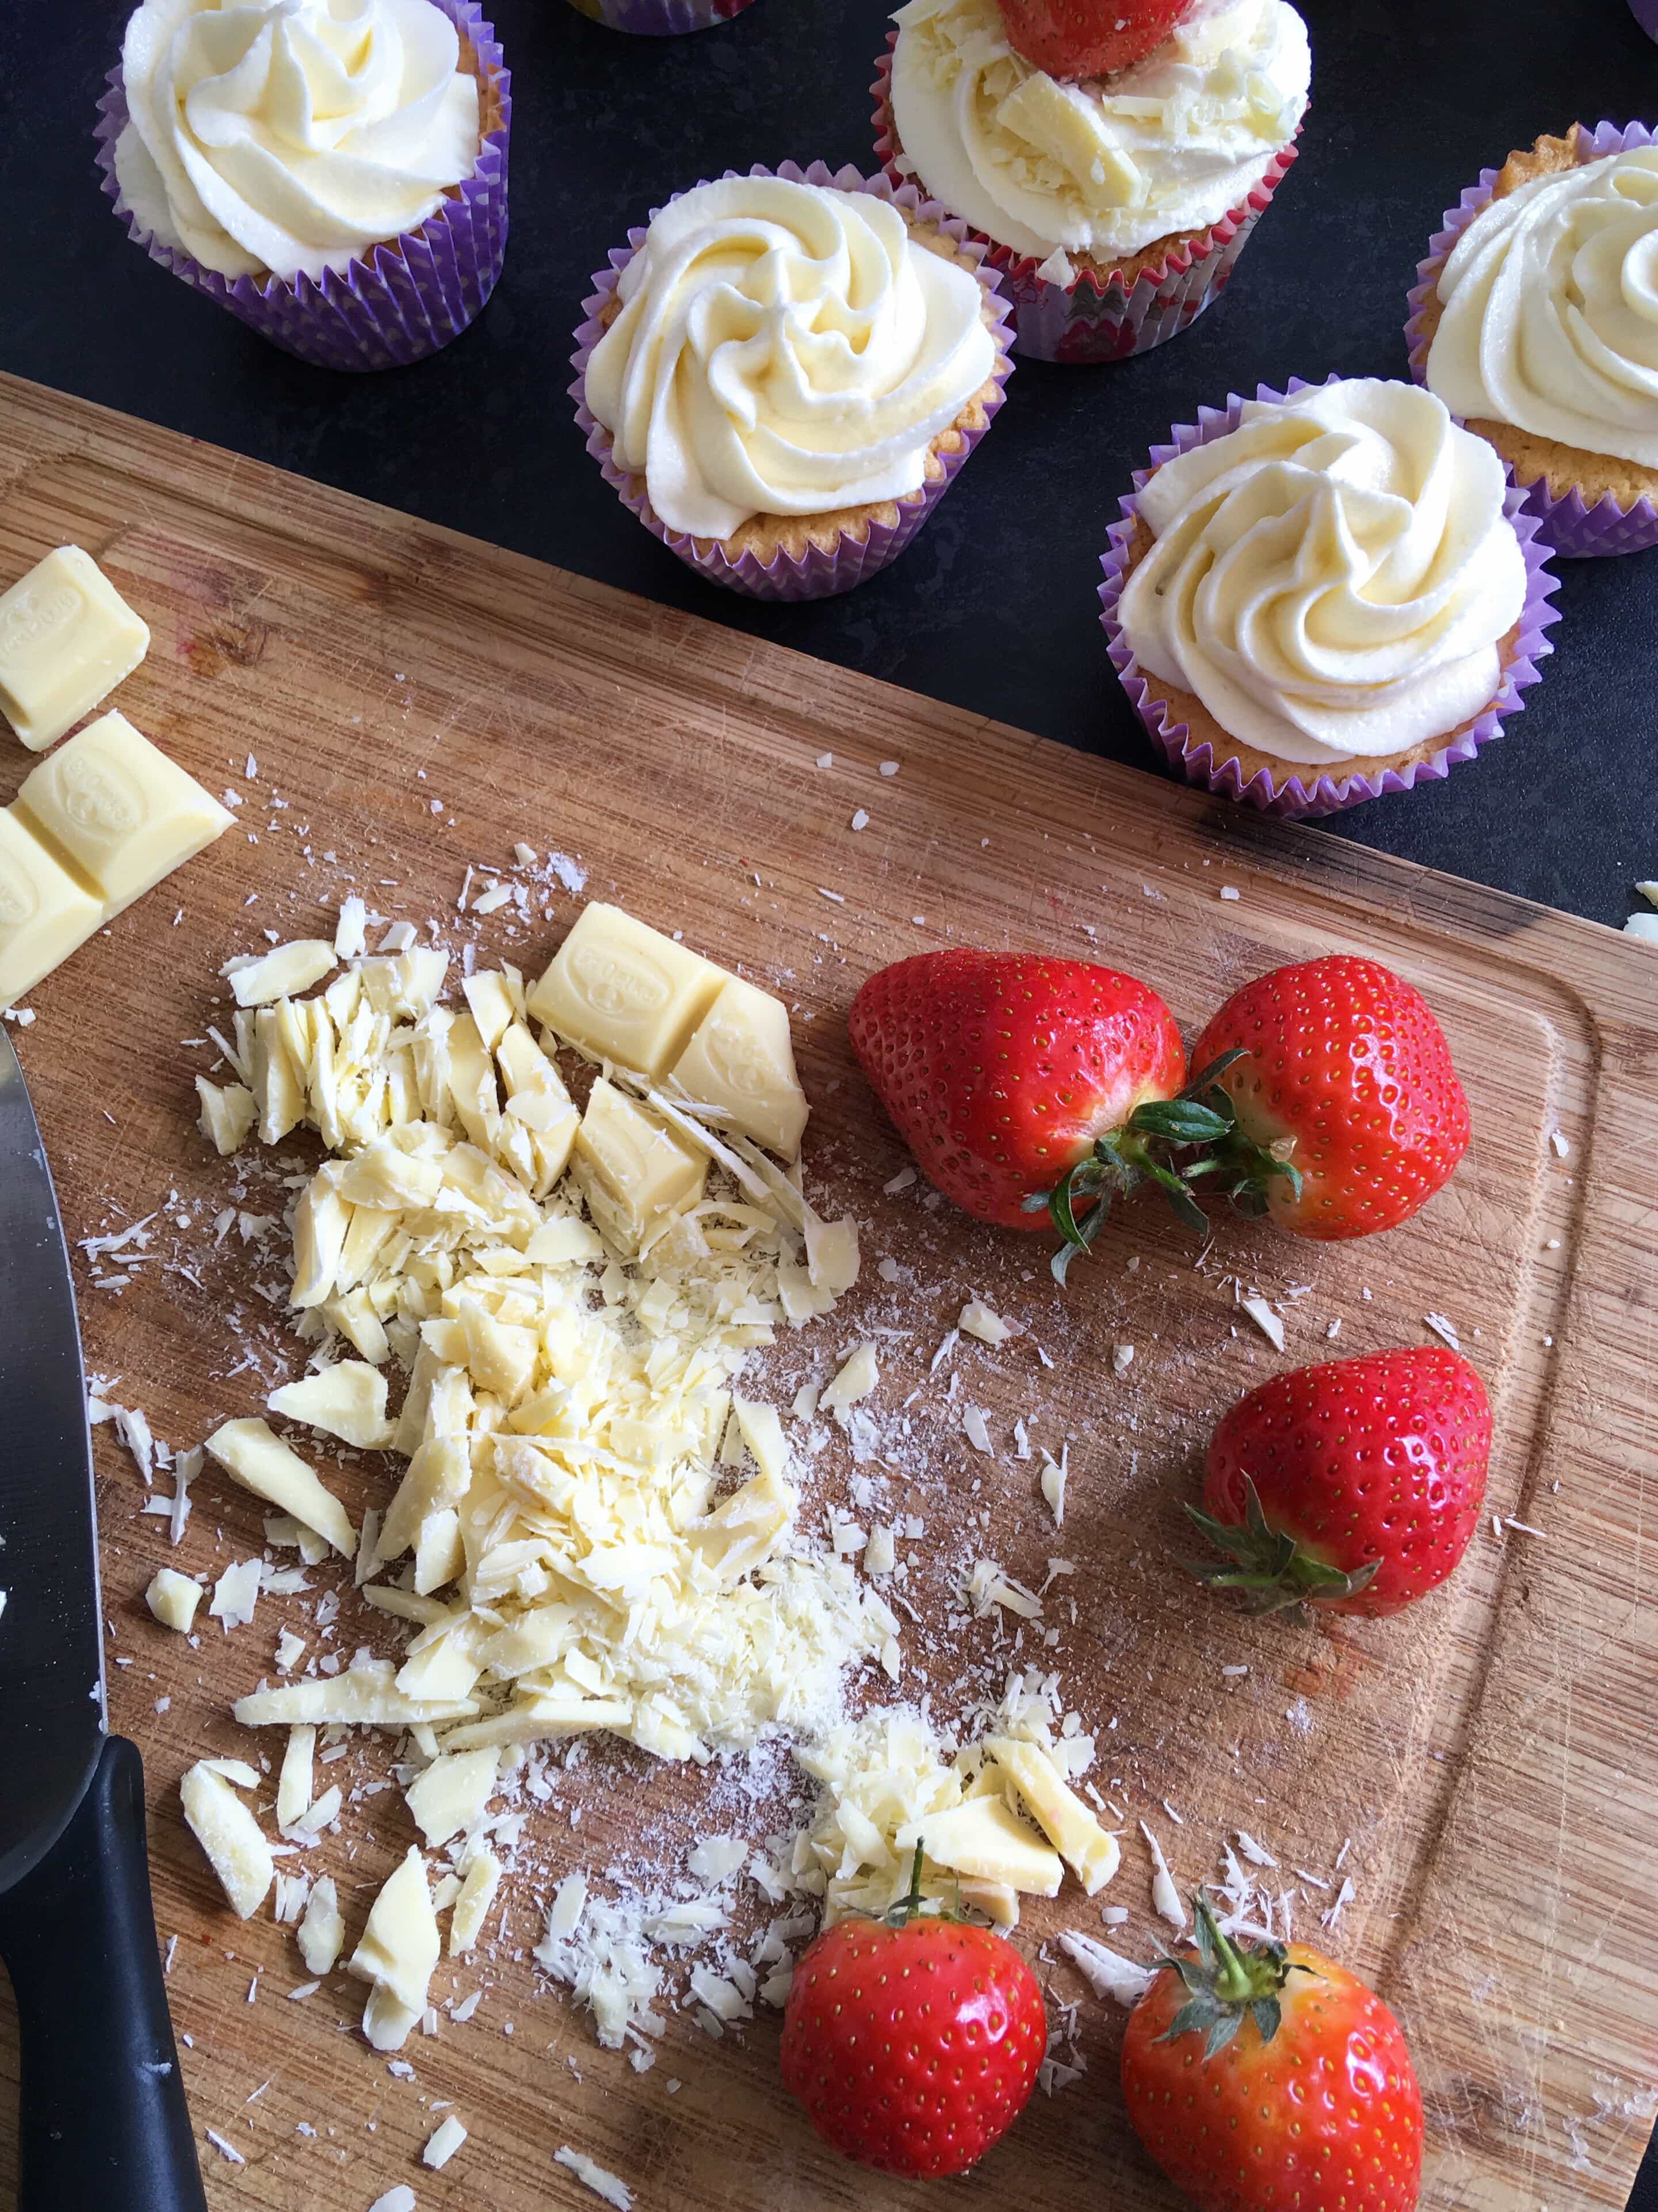 cupcakes topped with white chocolate buttercream and white chocolate pieces and a wooden chopping board with grated white chocolate and fresh strawberries.